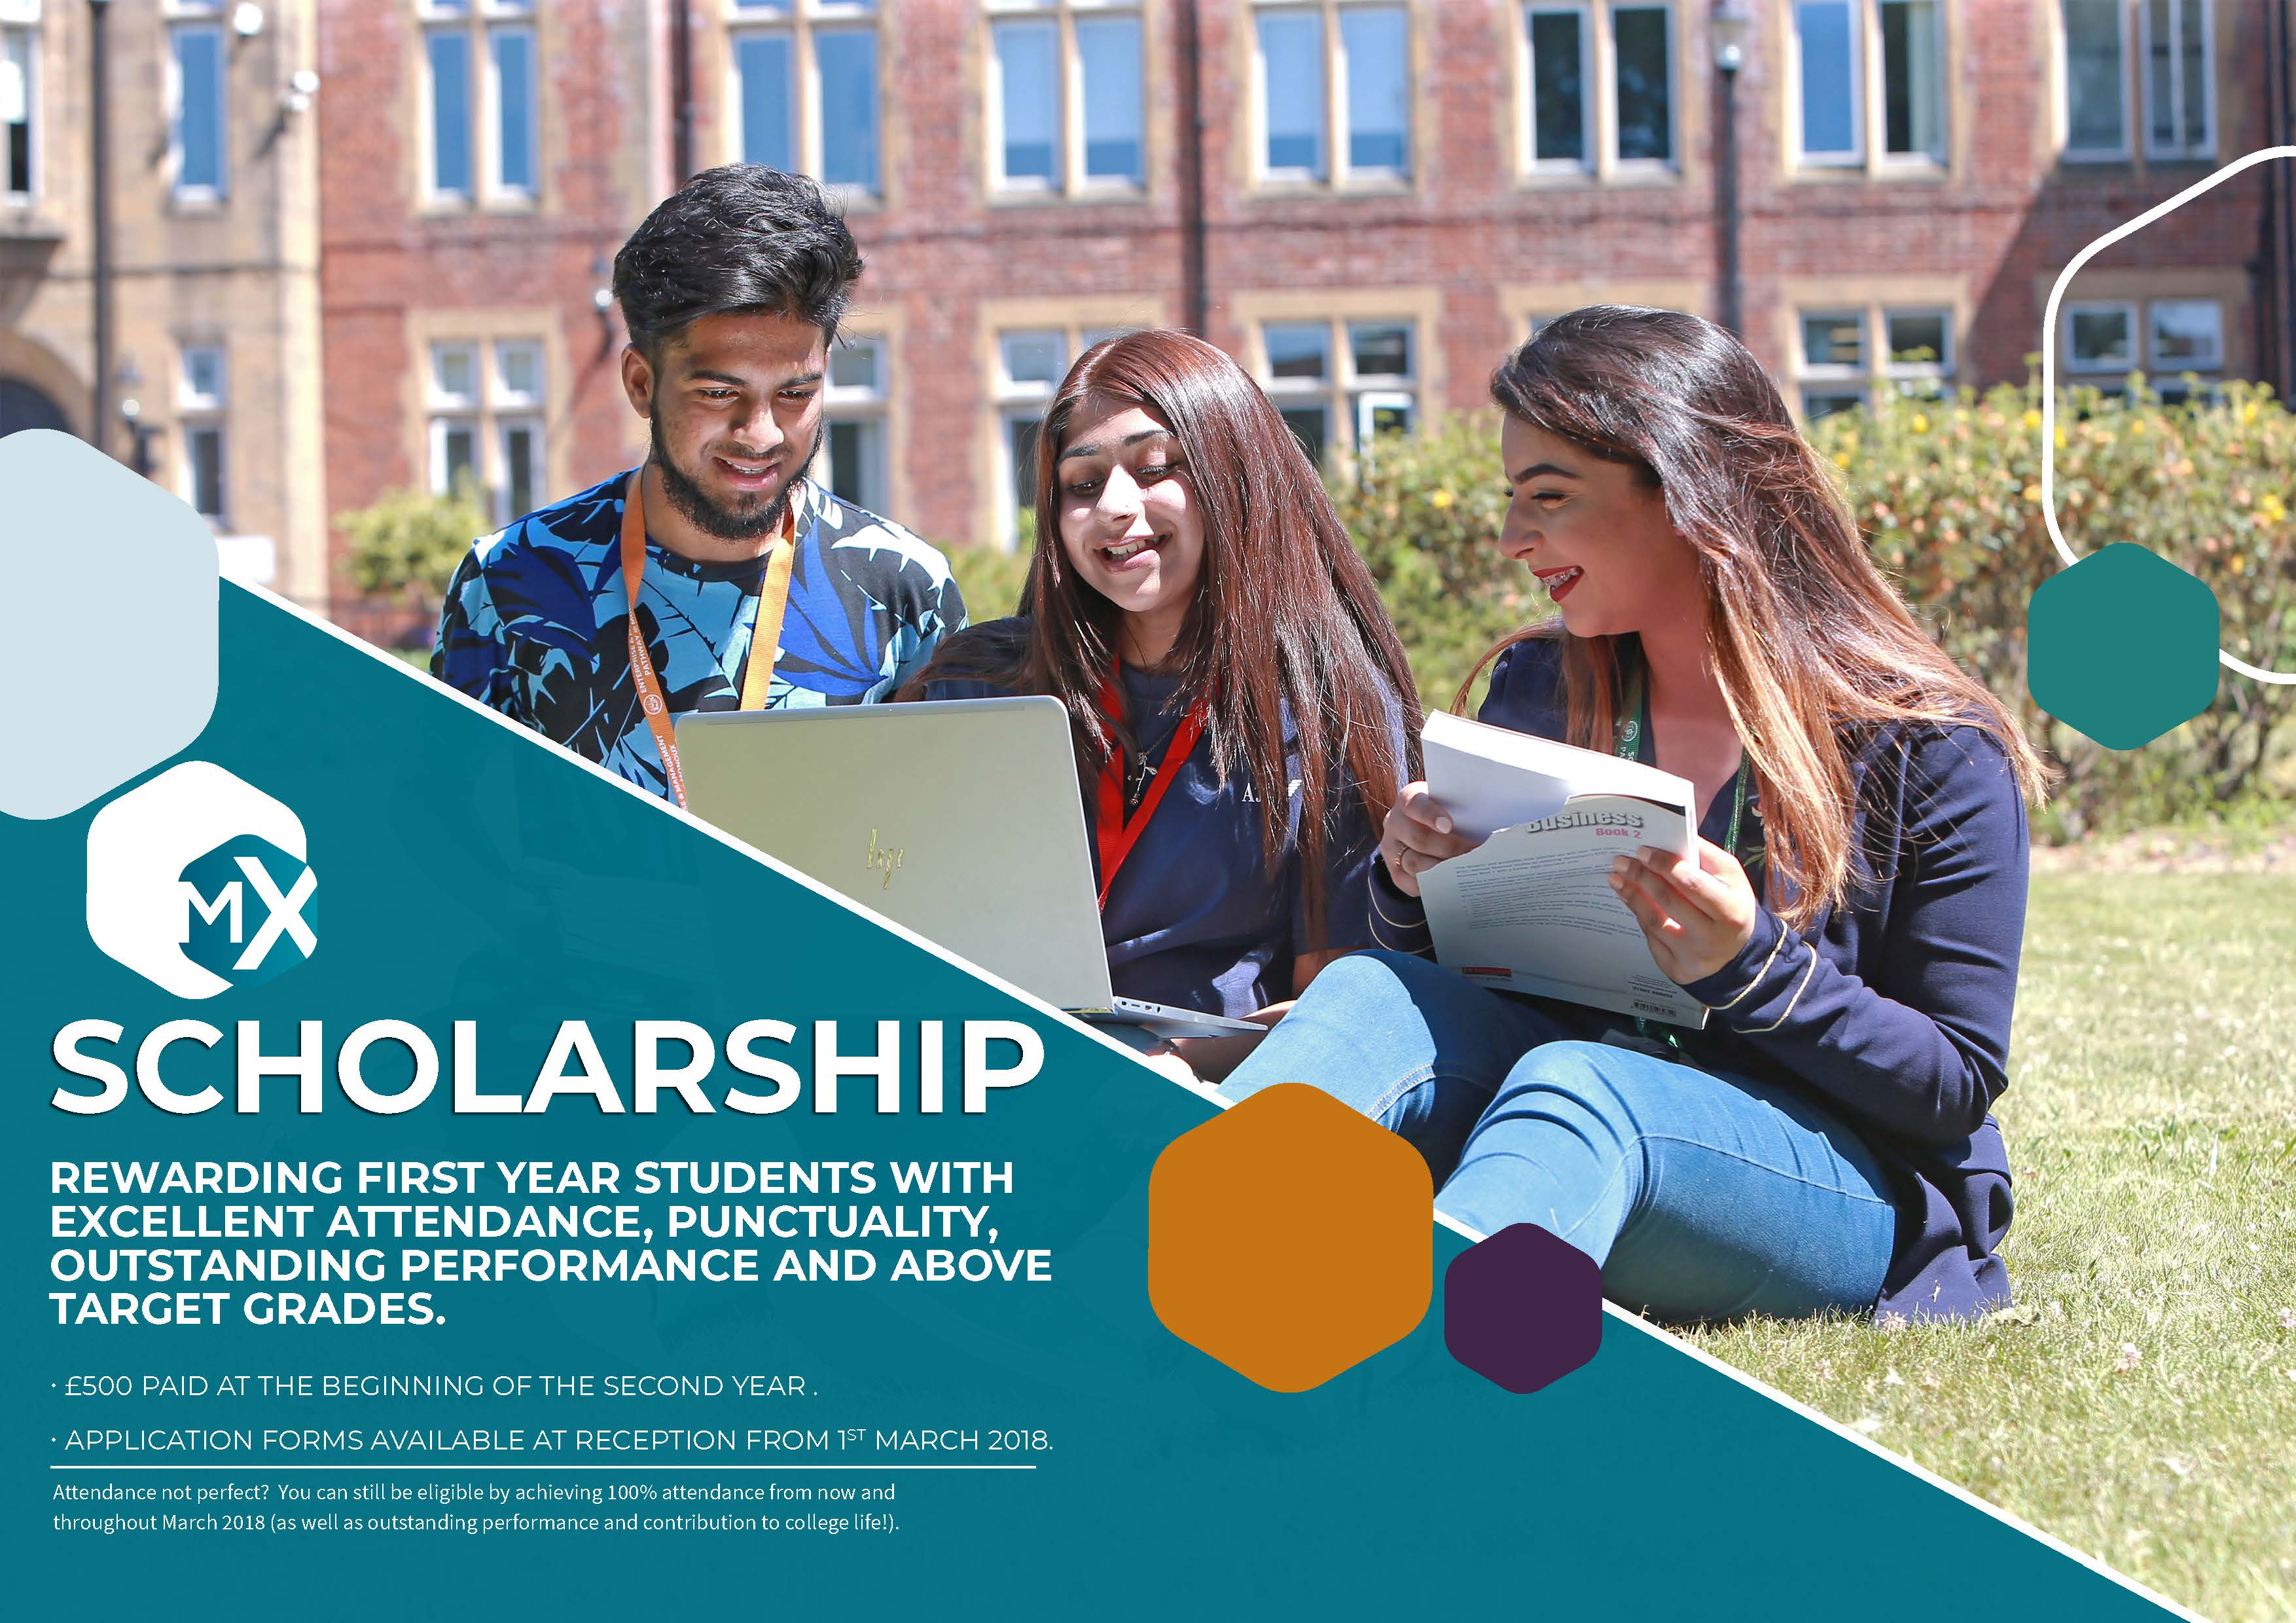 Poster promoting the college scholarship scheme